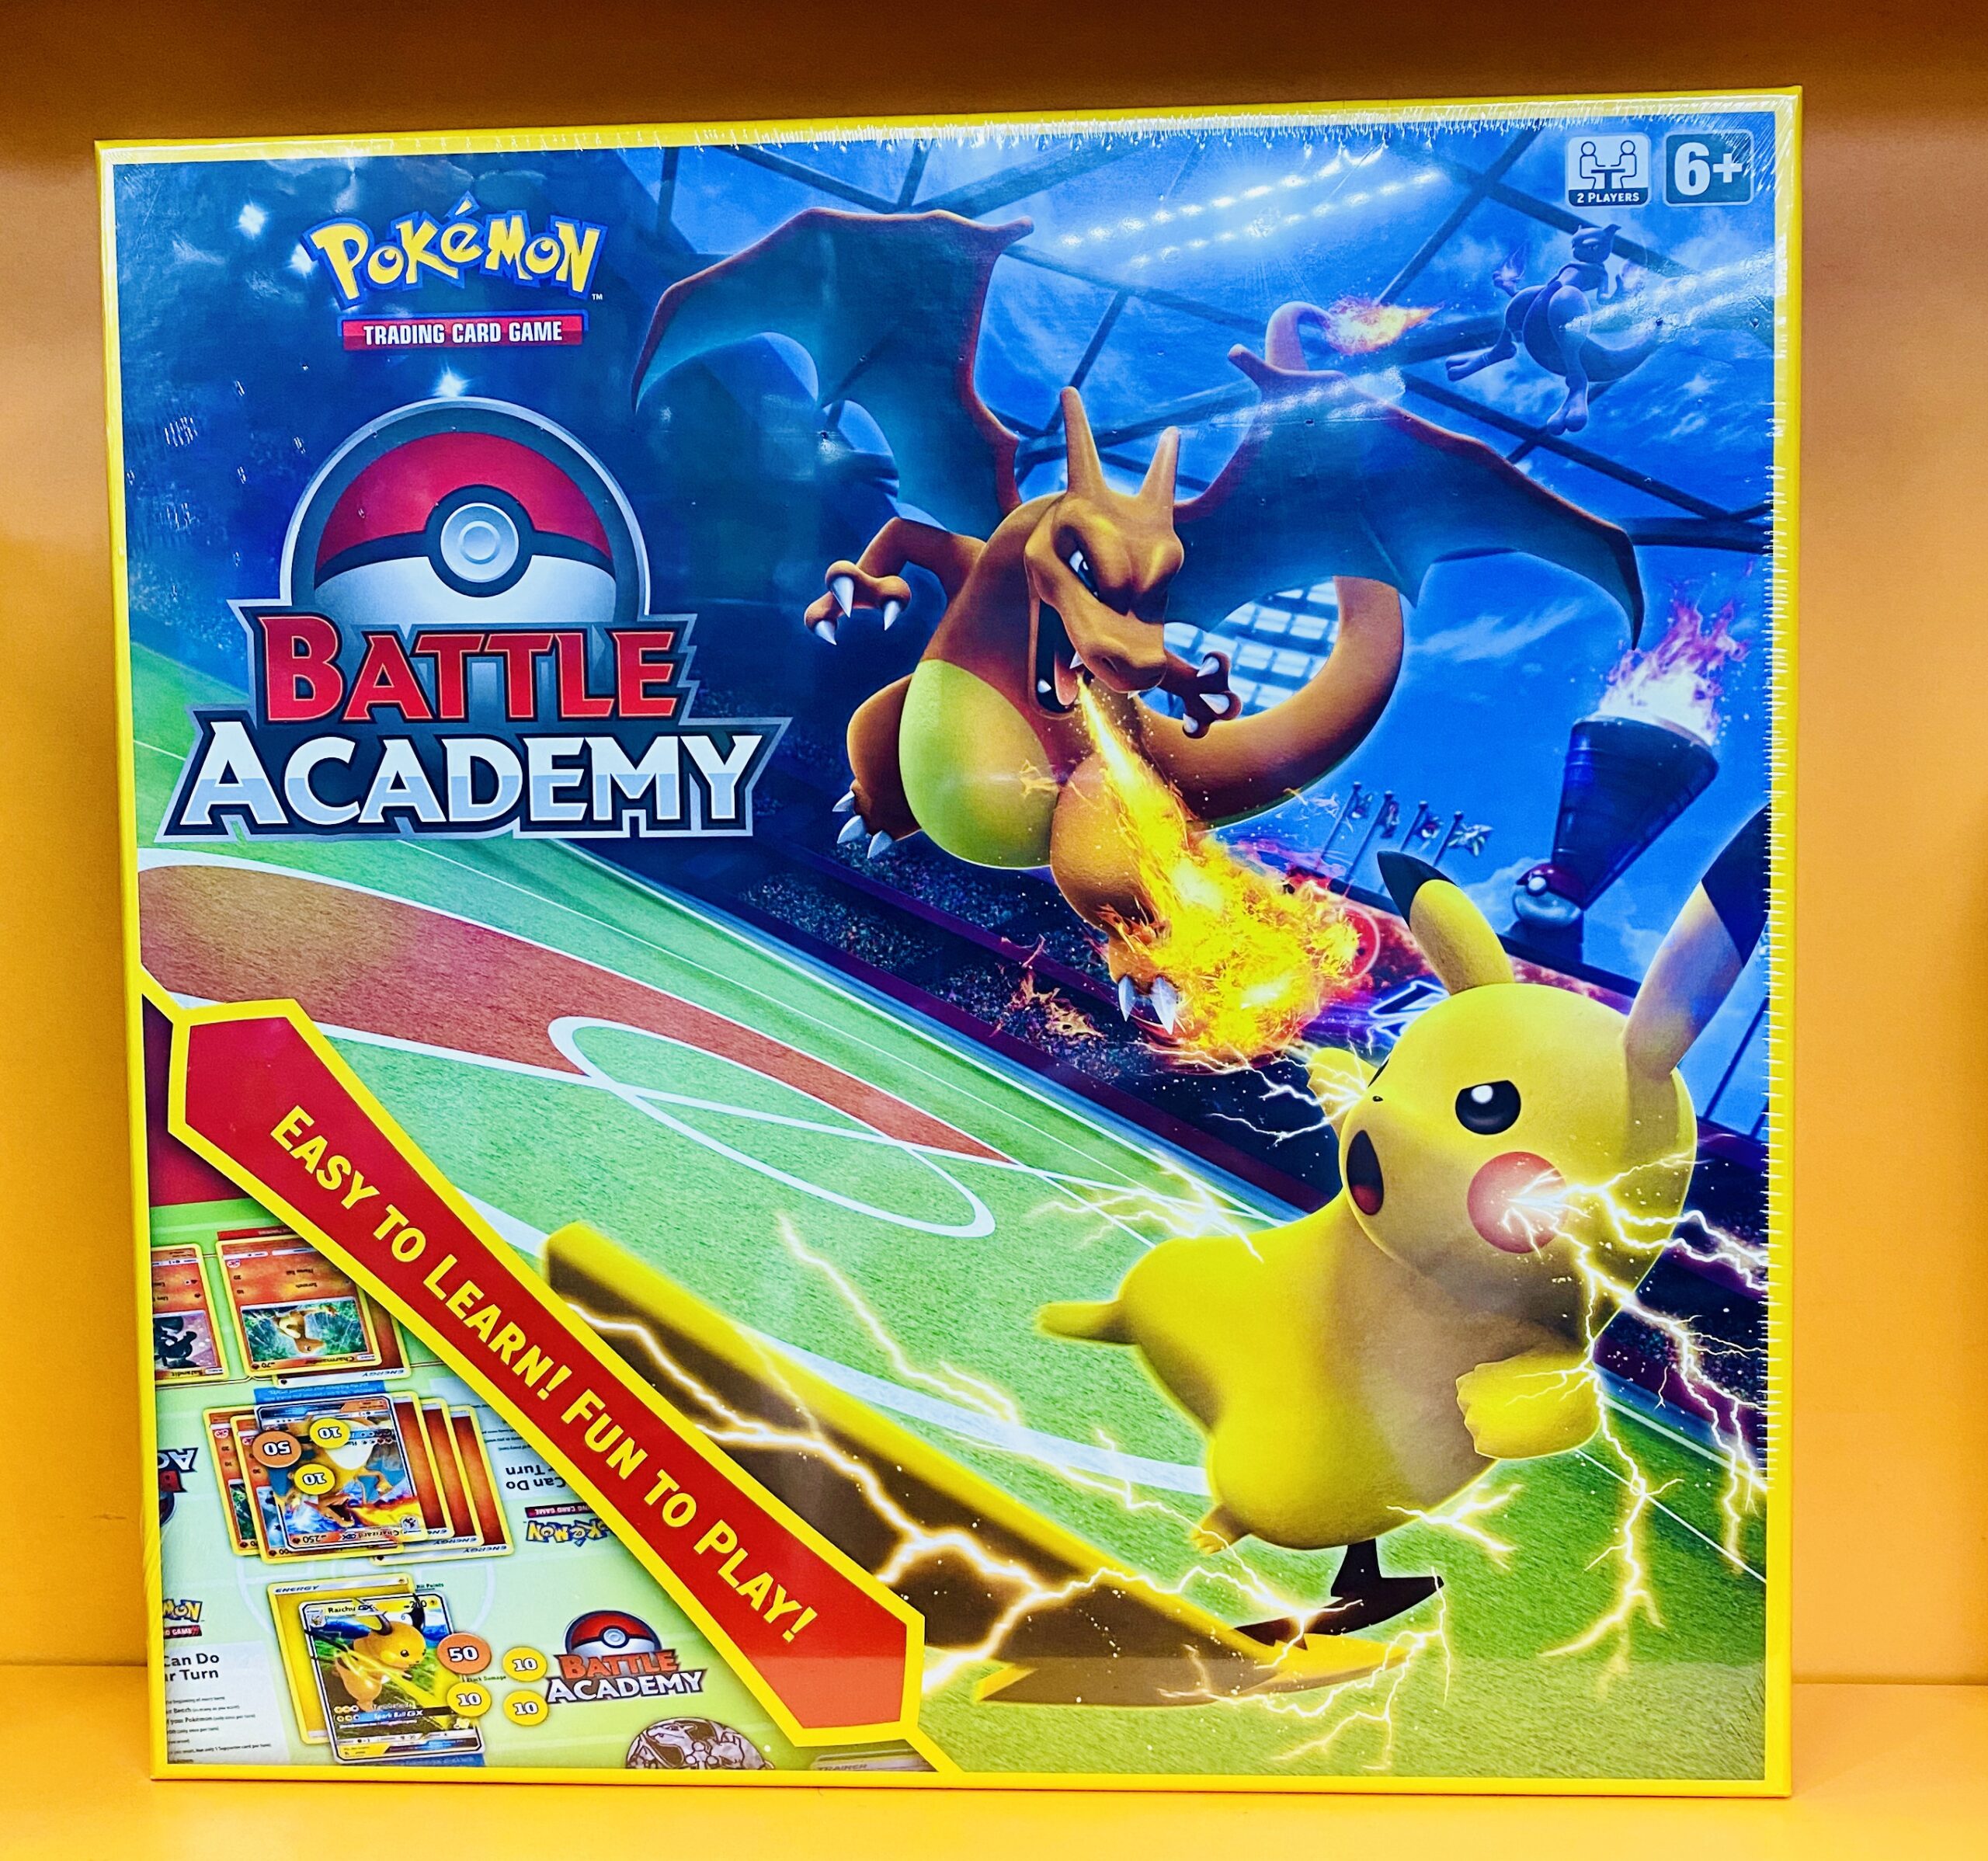 New Pokemon Trading Card Game Releases: Battle Academy and Darkness